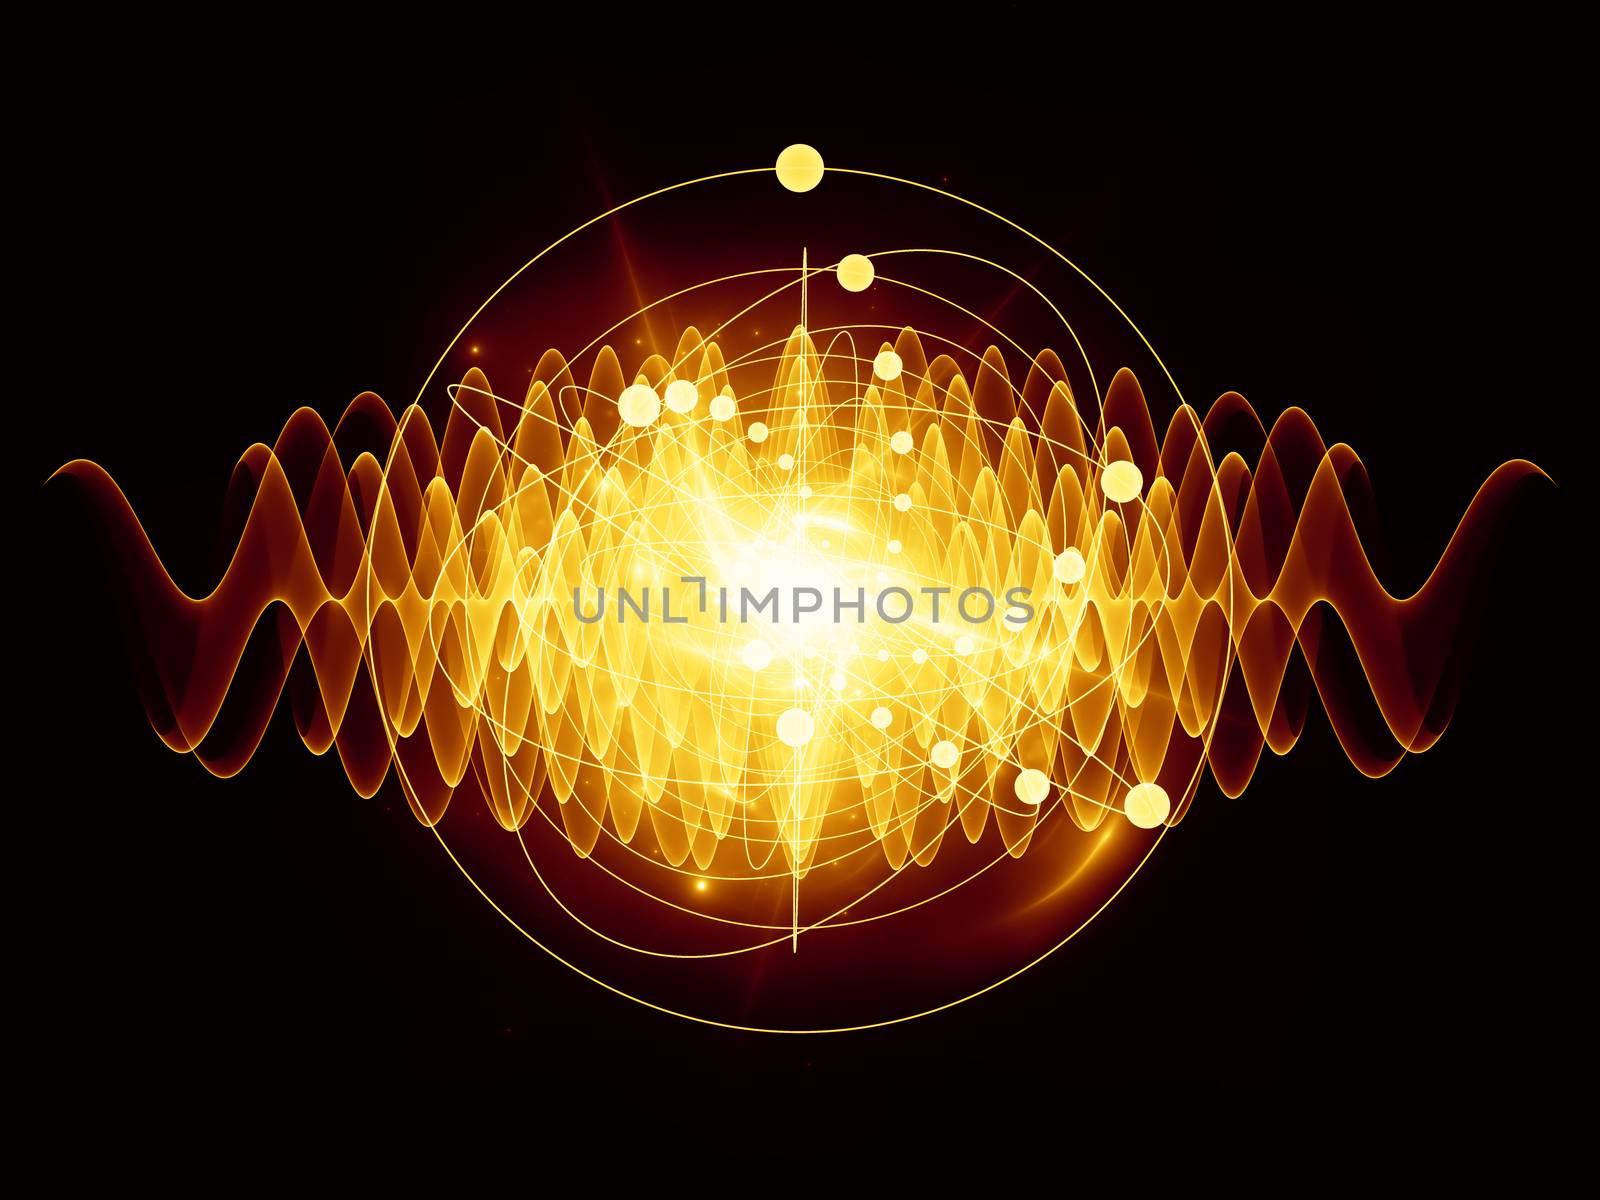 Abstract concept of atom and quantum waves illustrated with fractal elements